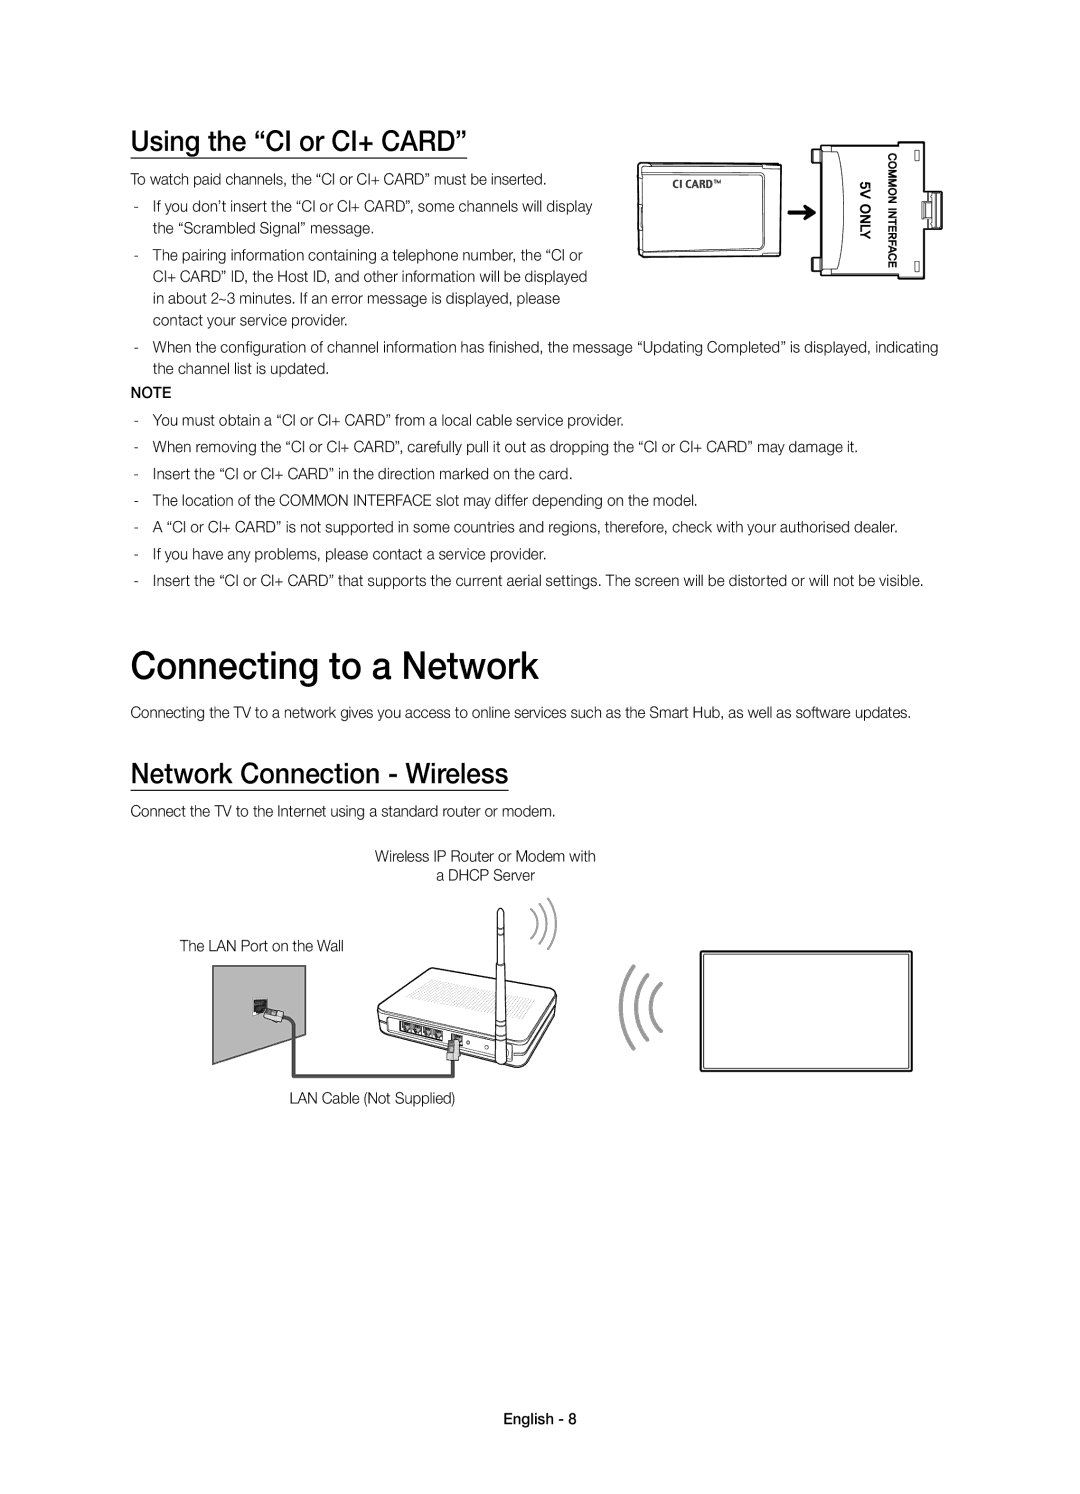 Samsung UE55HU7100SXXH, UE55HU7100SXZG manual Connecting to a Network, Using the CI or CI+ Card, Network Connection Wireless 